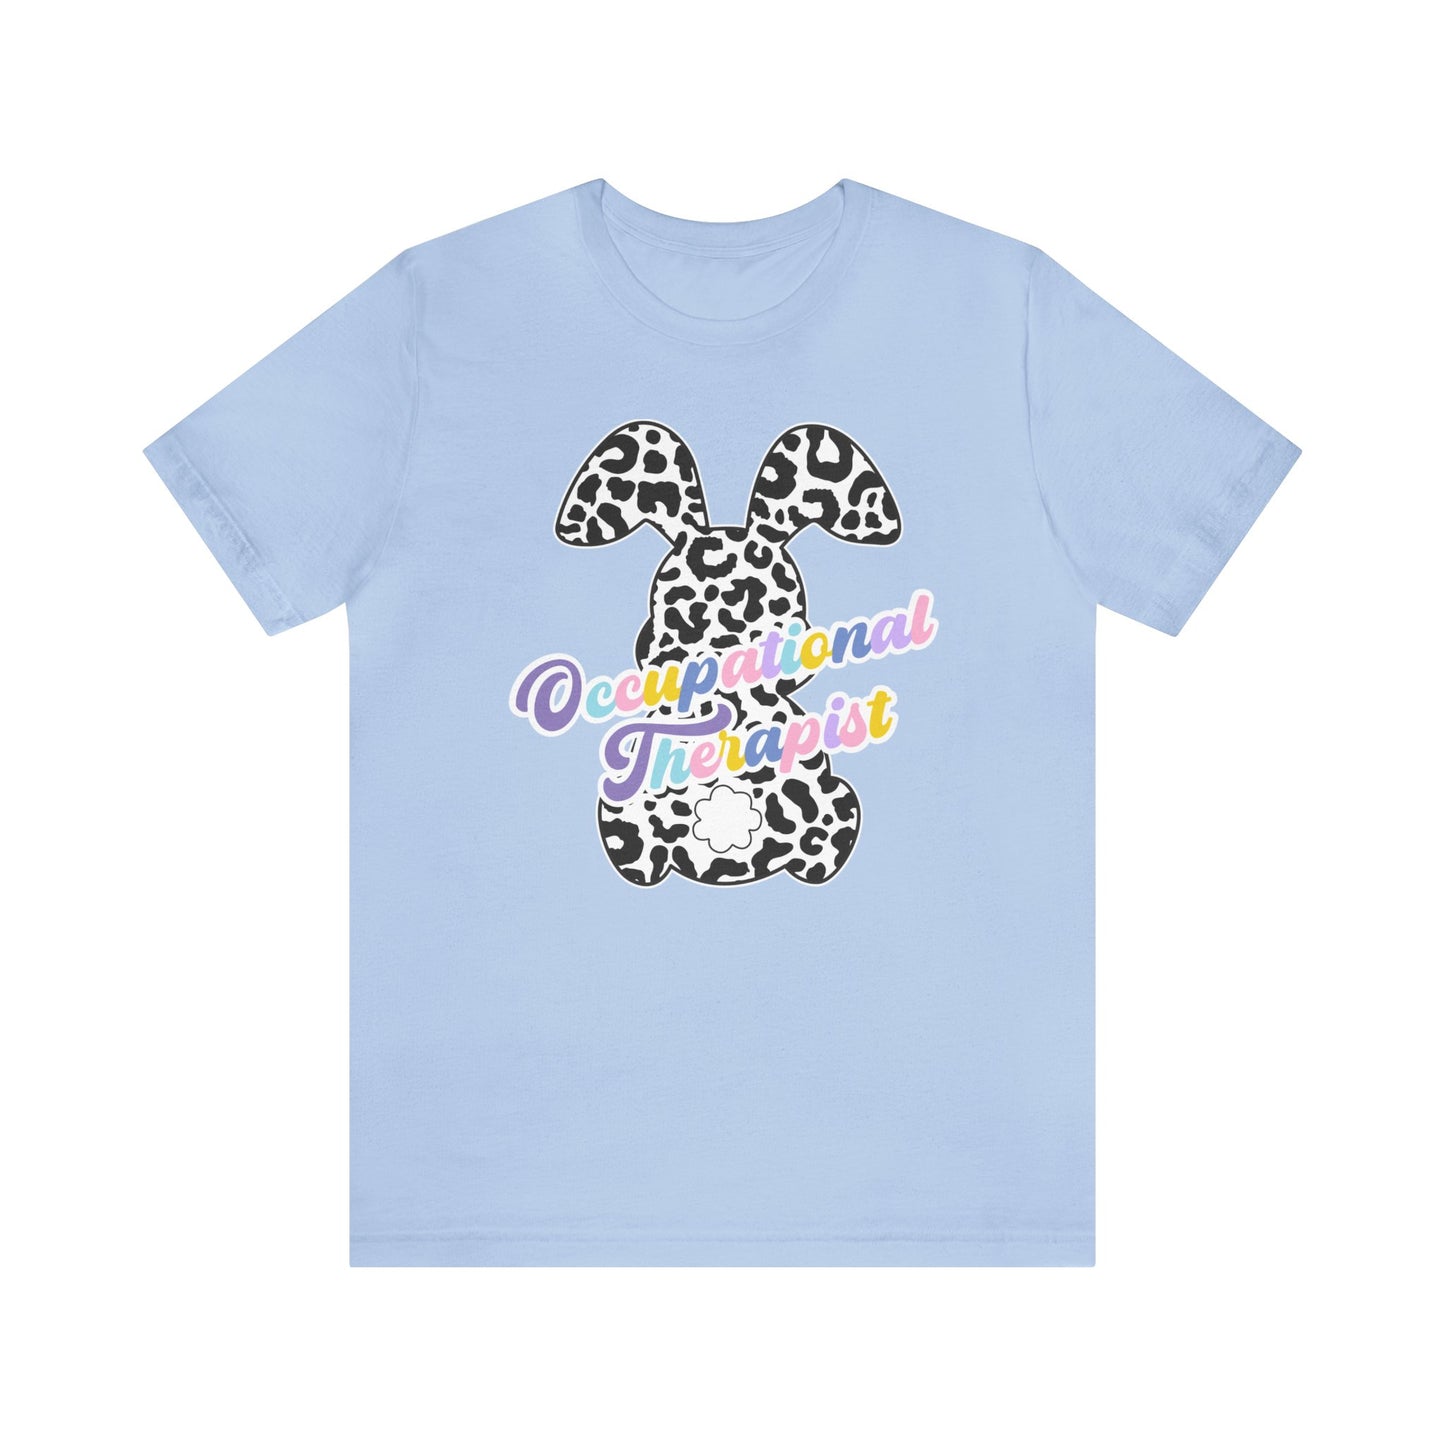 Happy Easter Occupational Therapist Shirt, Easter Shirt, Bunny Shirt, Happy Easter Shirt, Easter Bunny Shirt, Therapist Shirt